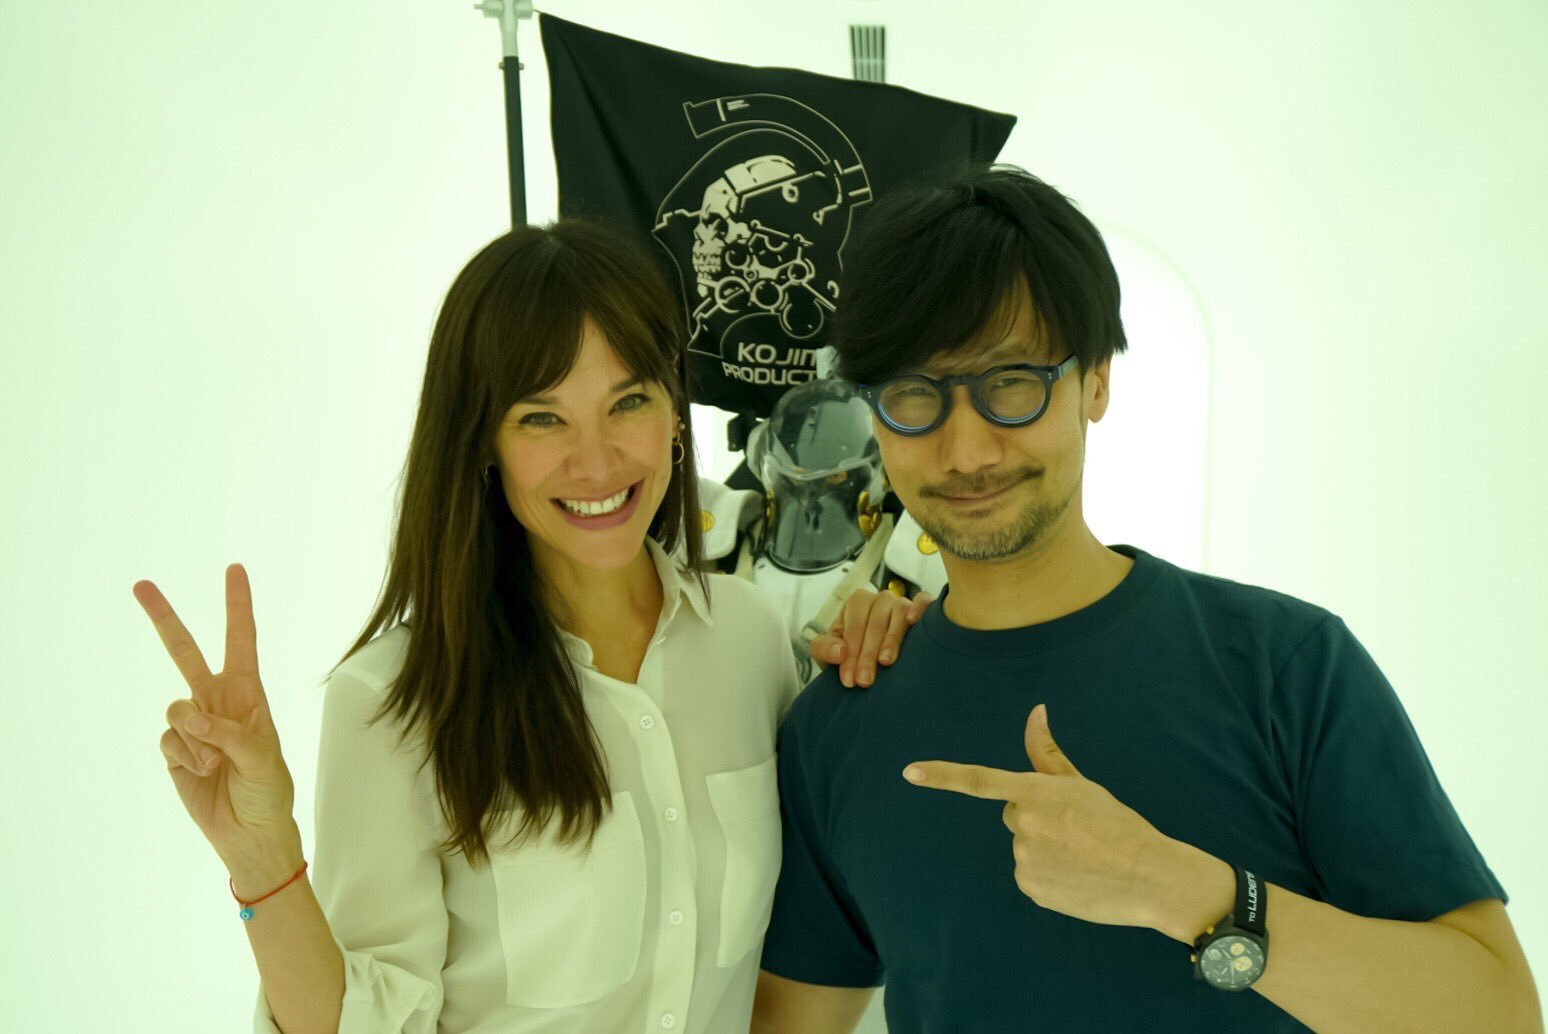 Hideo Kojima fans could see Death Stranding 2 announced at The Game Awards  - Xfire